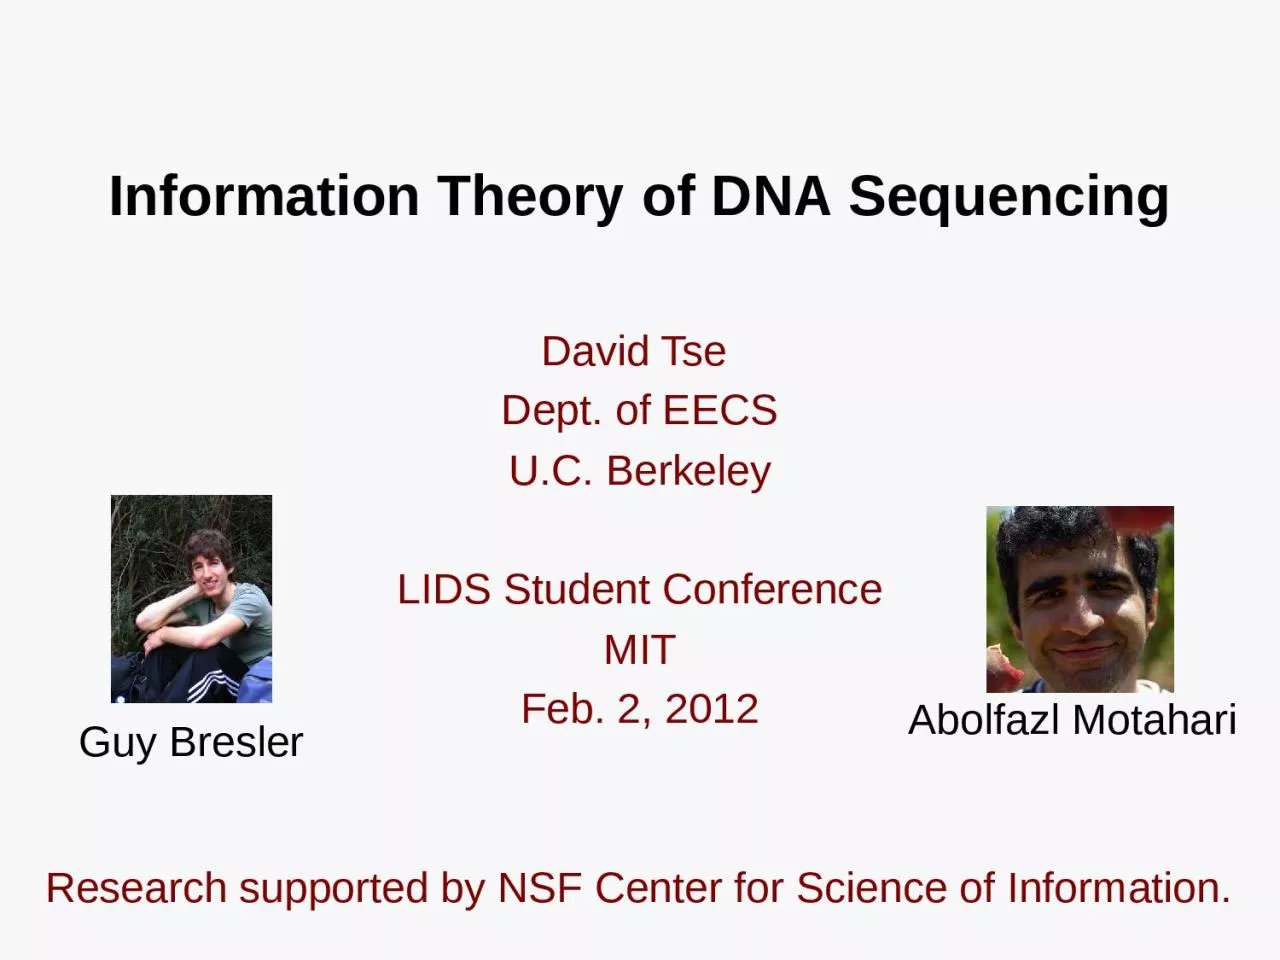 Information Theory of DNA Sequencing